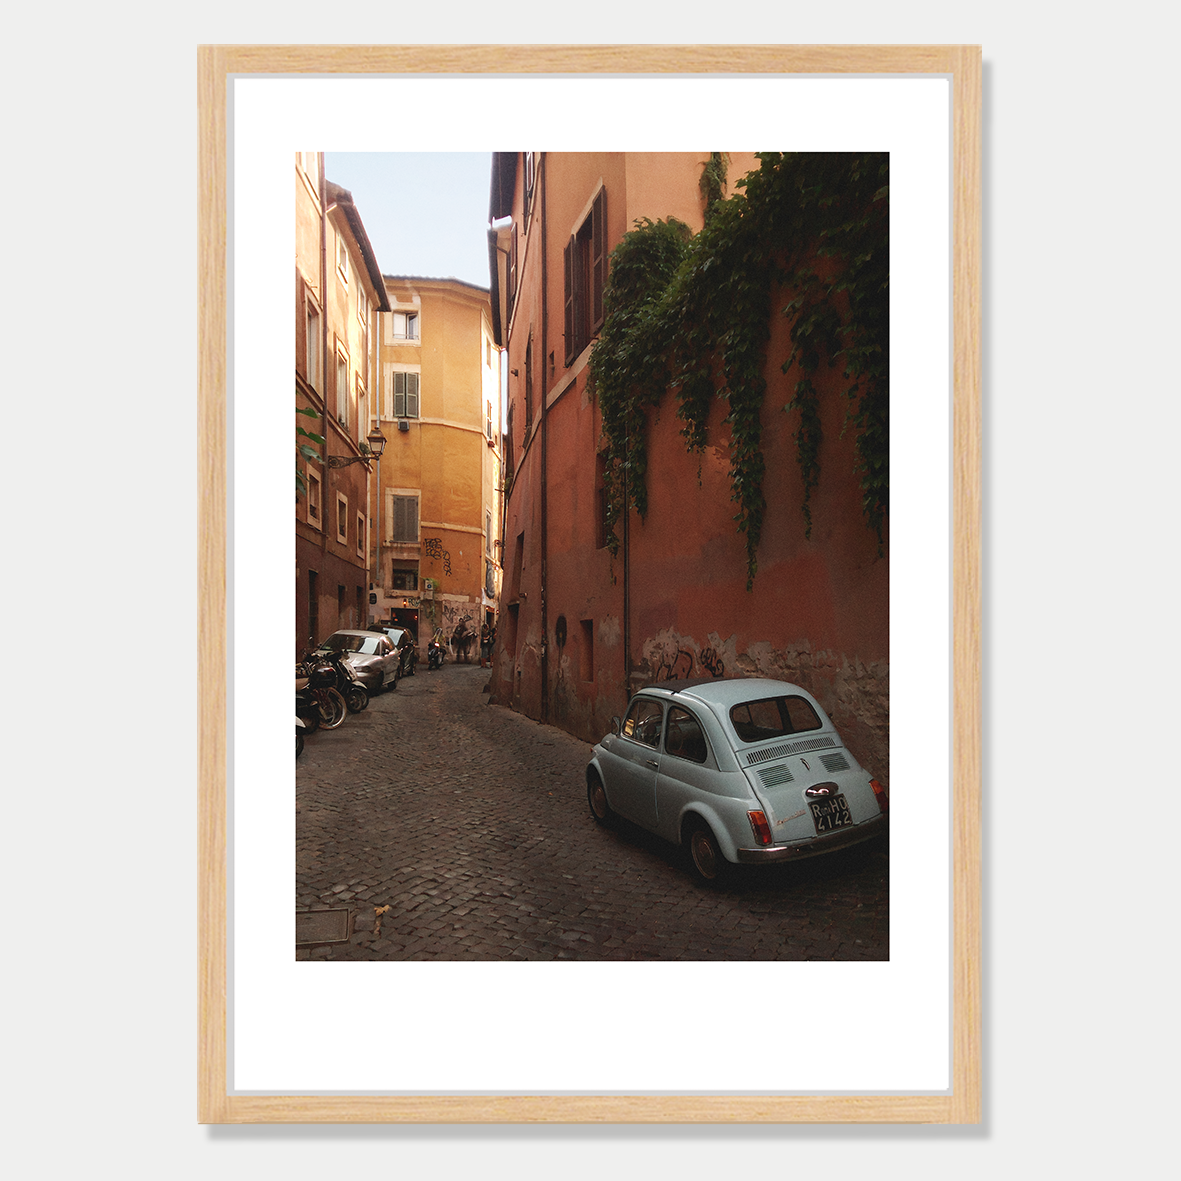 Little Car in a Backstreet of Trastavere, Rome Still Life Photographic Art Print in a Skinny Raw Frame